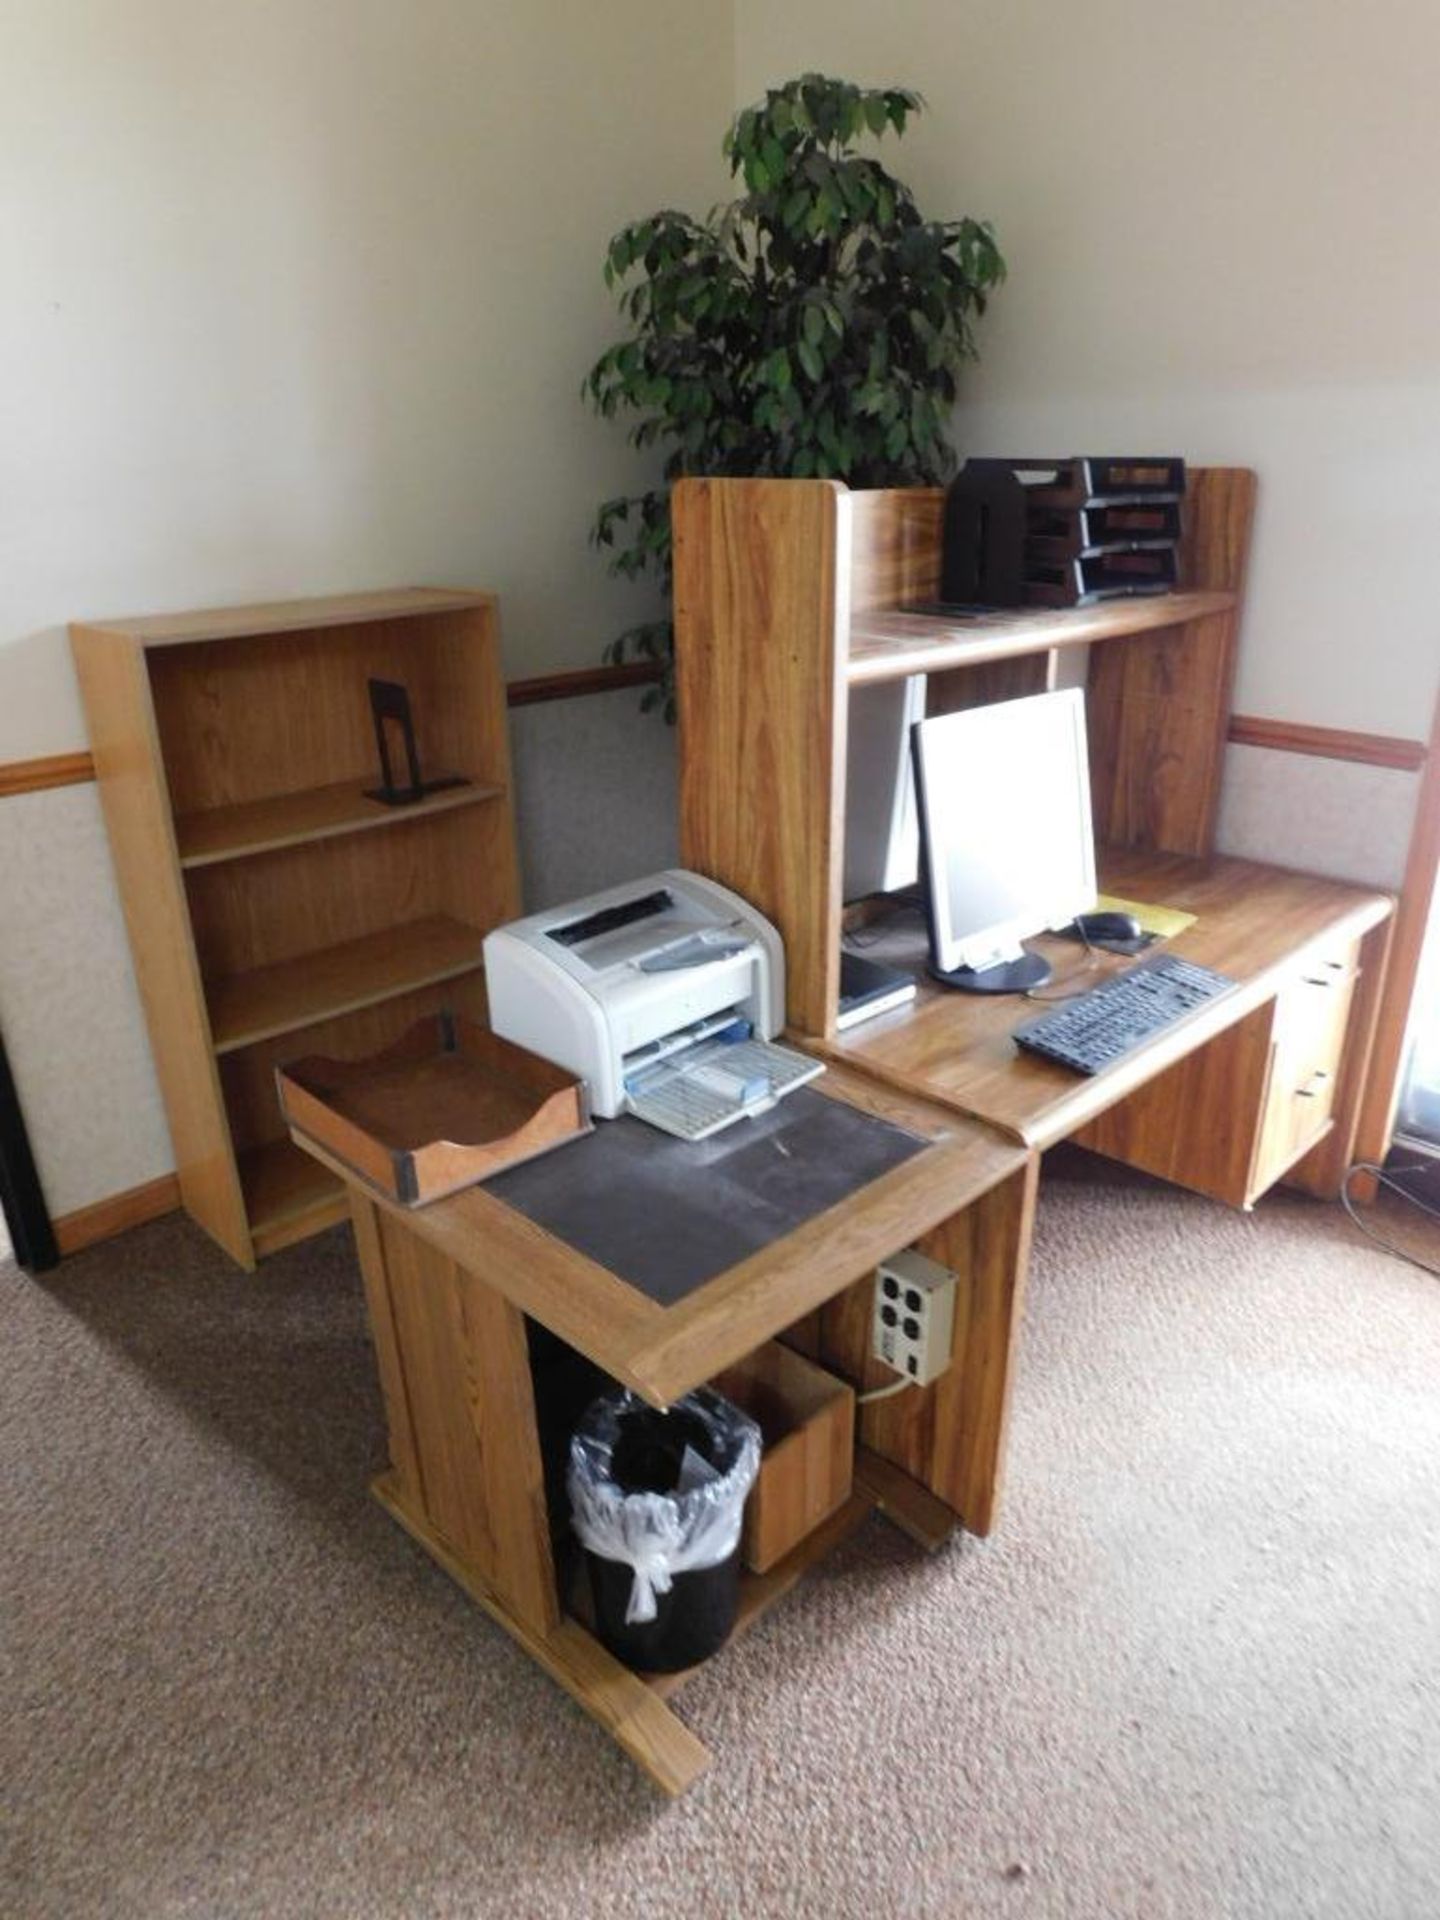 LOT: Contents of Main Office (NO ART, NO ELECTRONICS, NOTHING ATTACHED TO WALLS) - Image 15 of 27